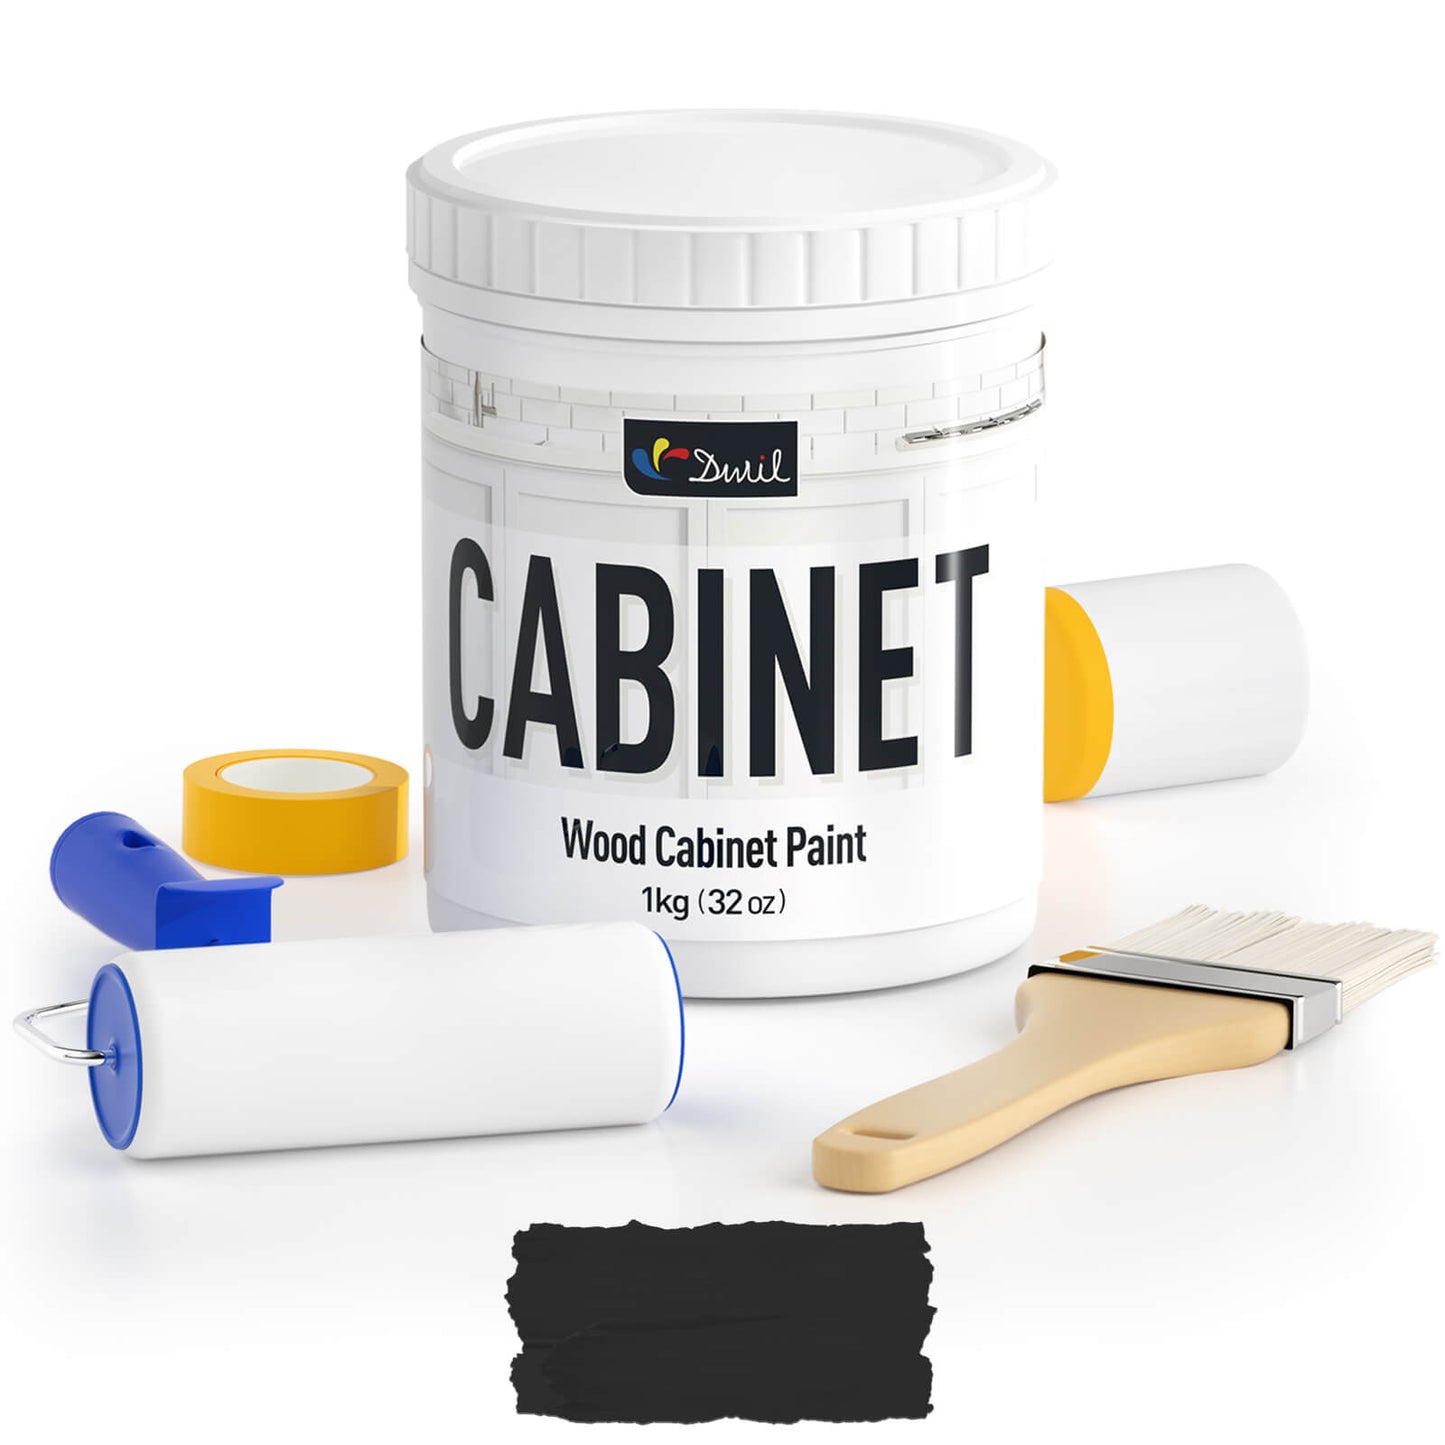 DWIL Wood Cabinet Paint Kit （With tools）